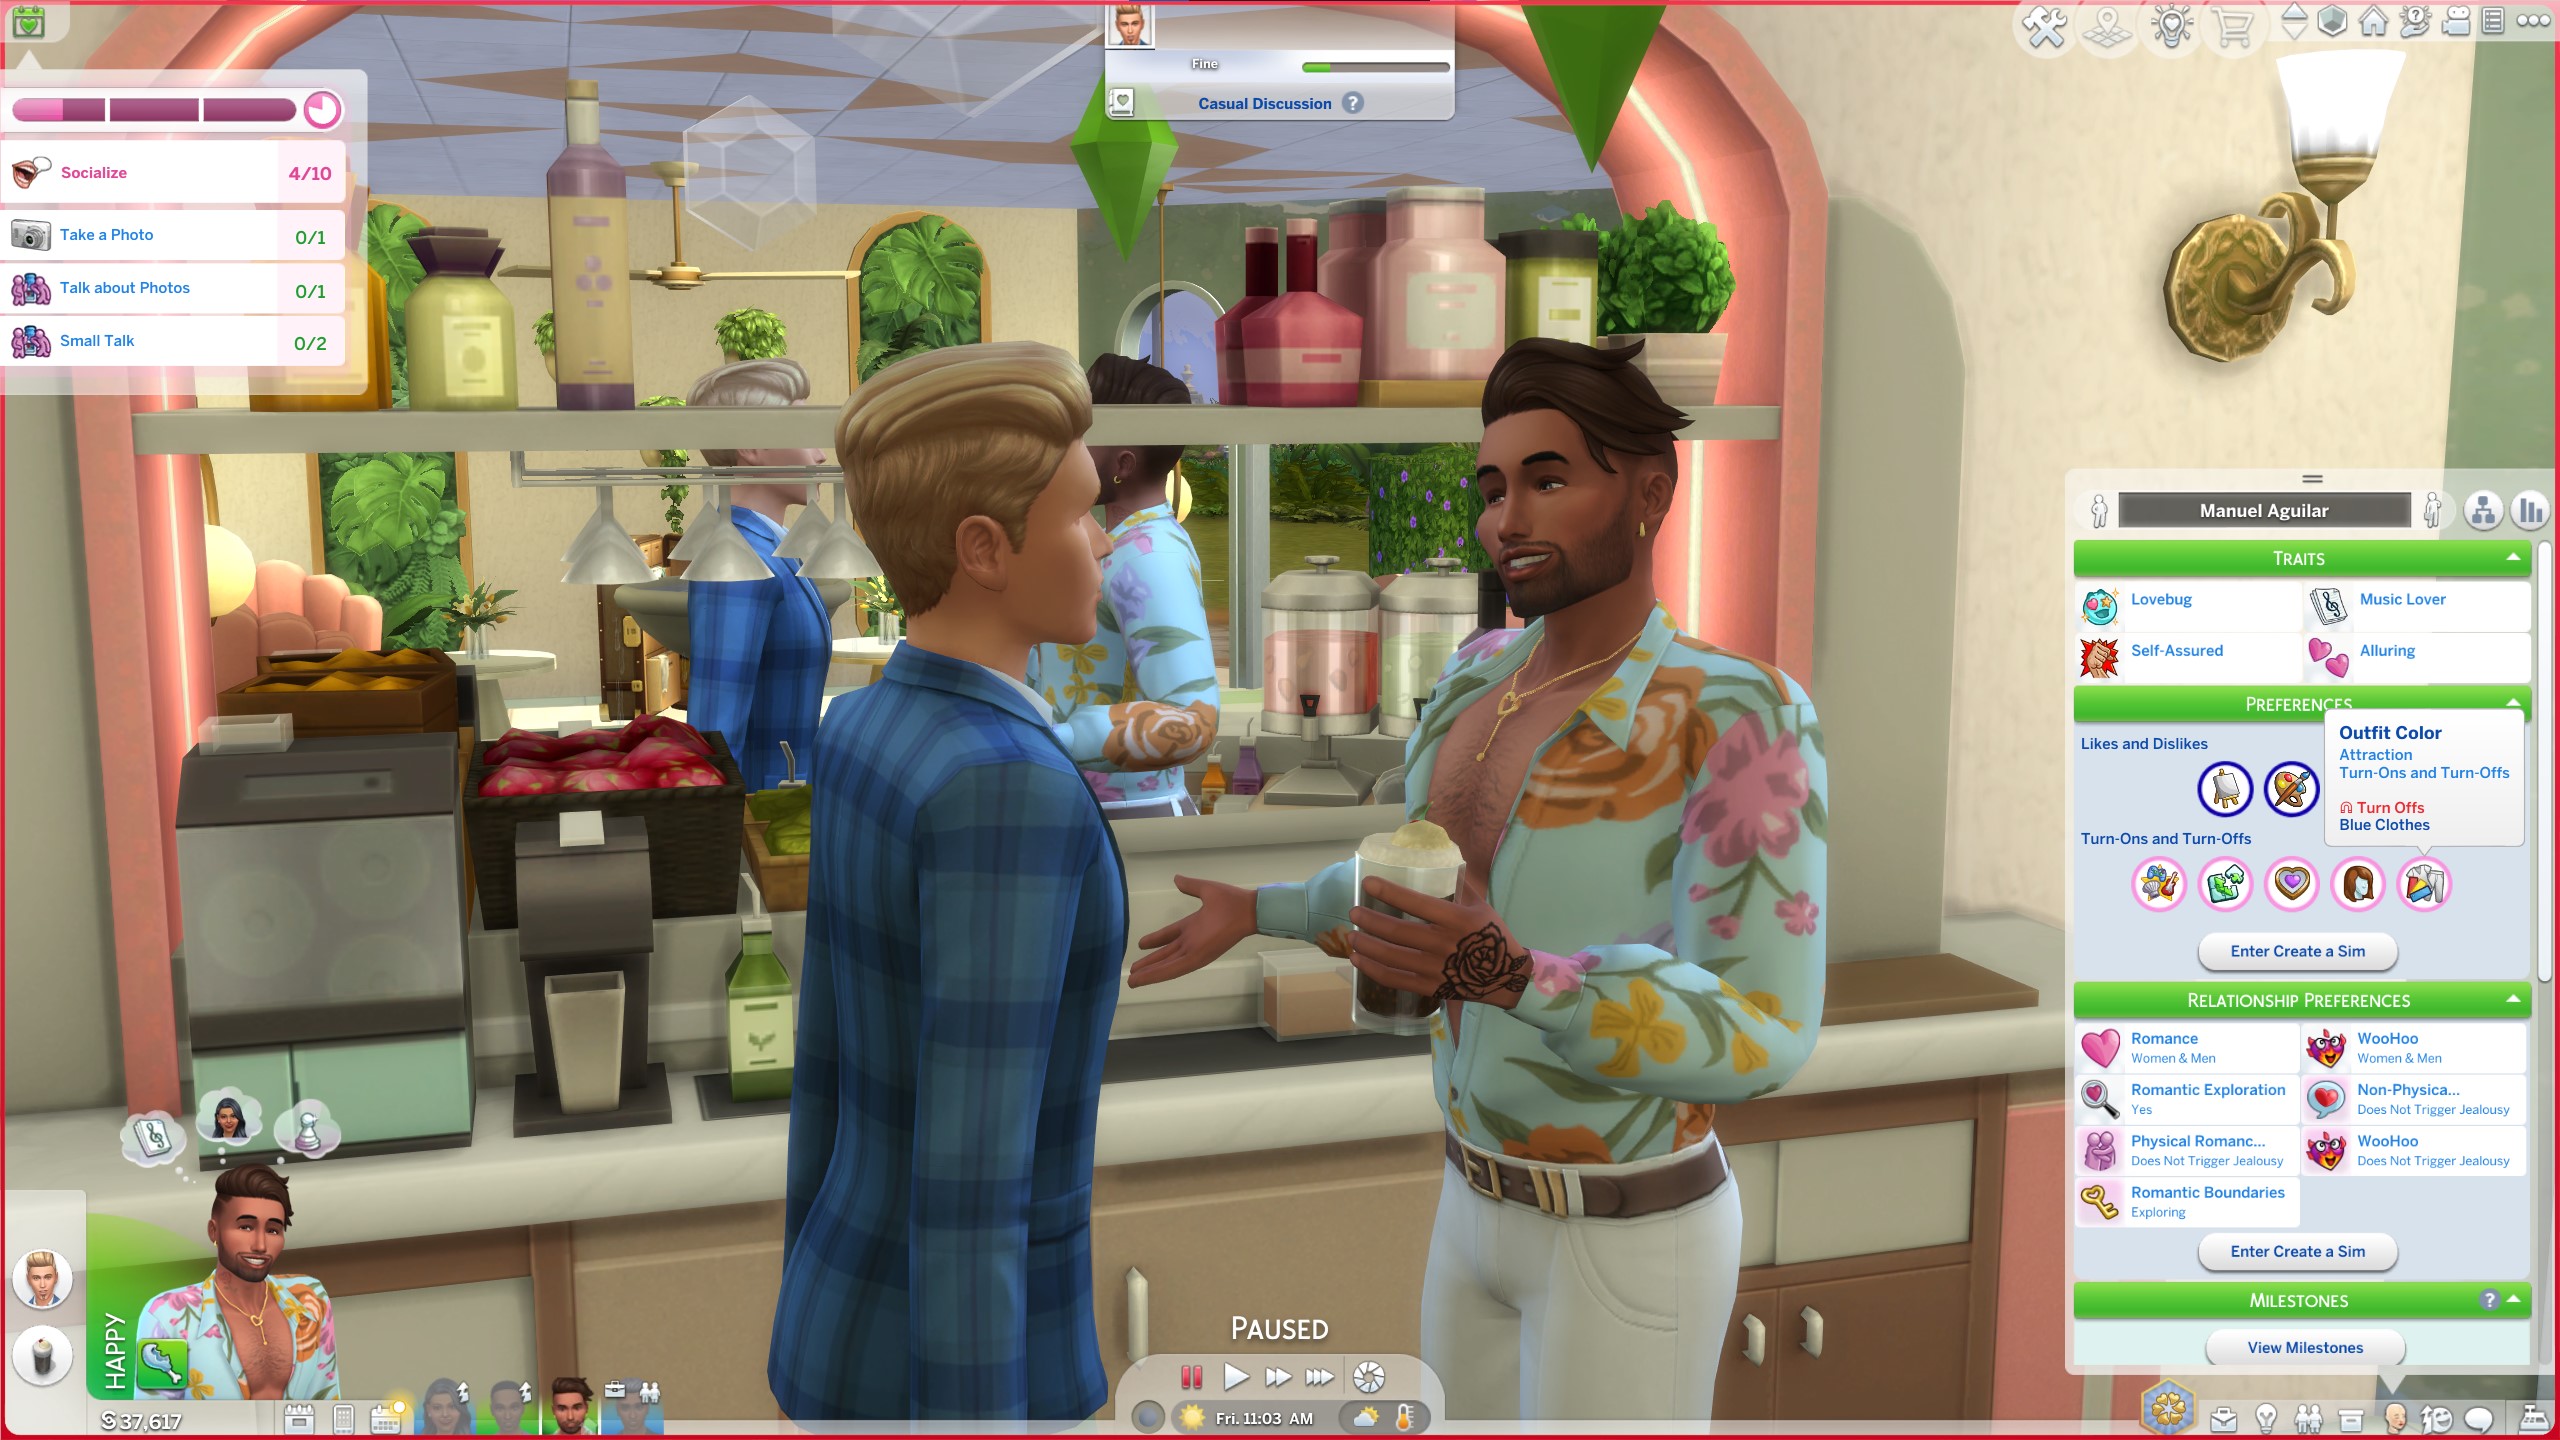 The Sims 4 Lovestruck - Manuel talks to Johnny Zest over drinks at a park and their date goals are to socialize, small talk, and take a photo.